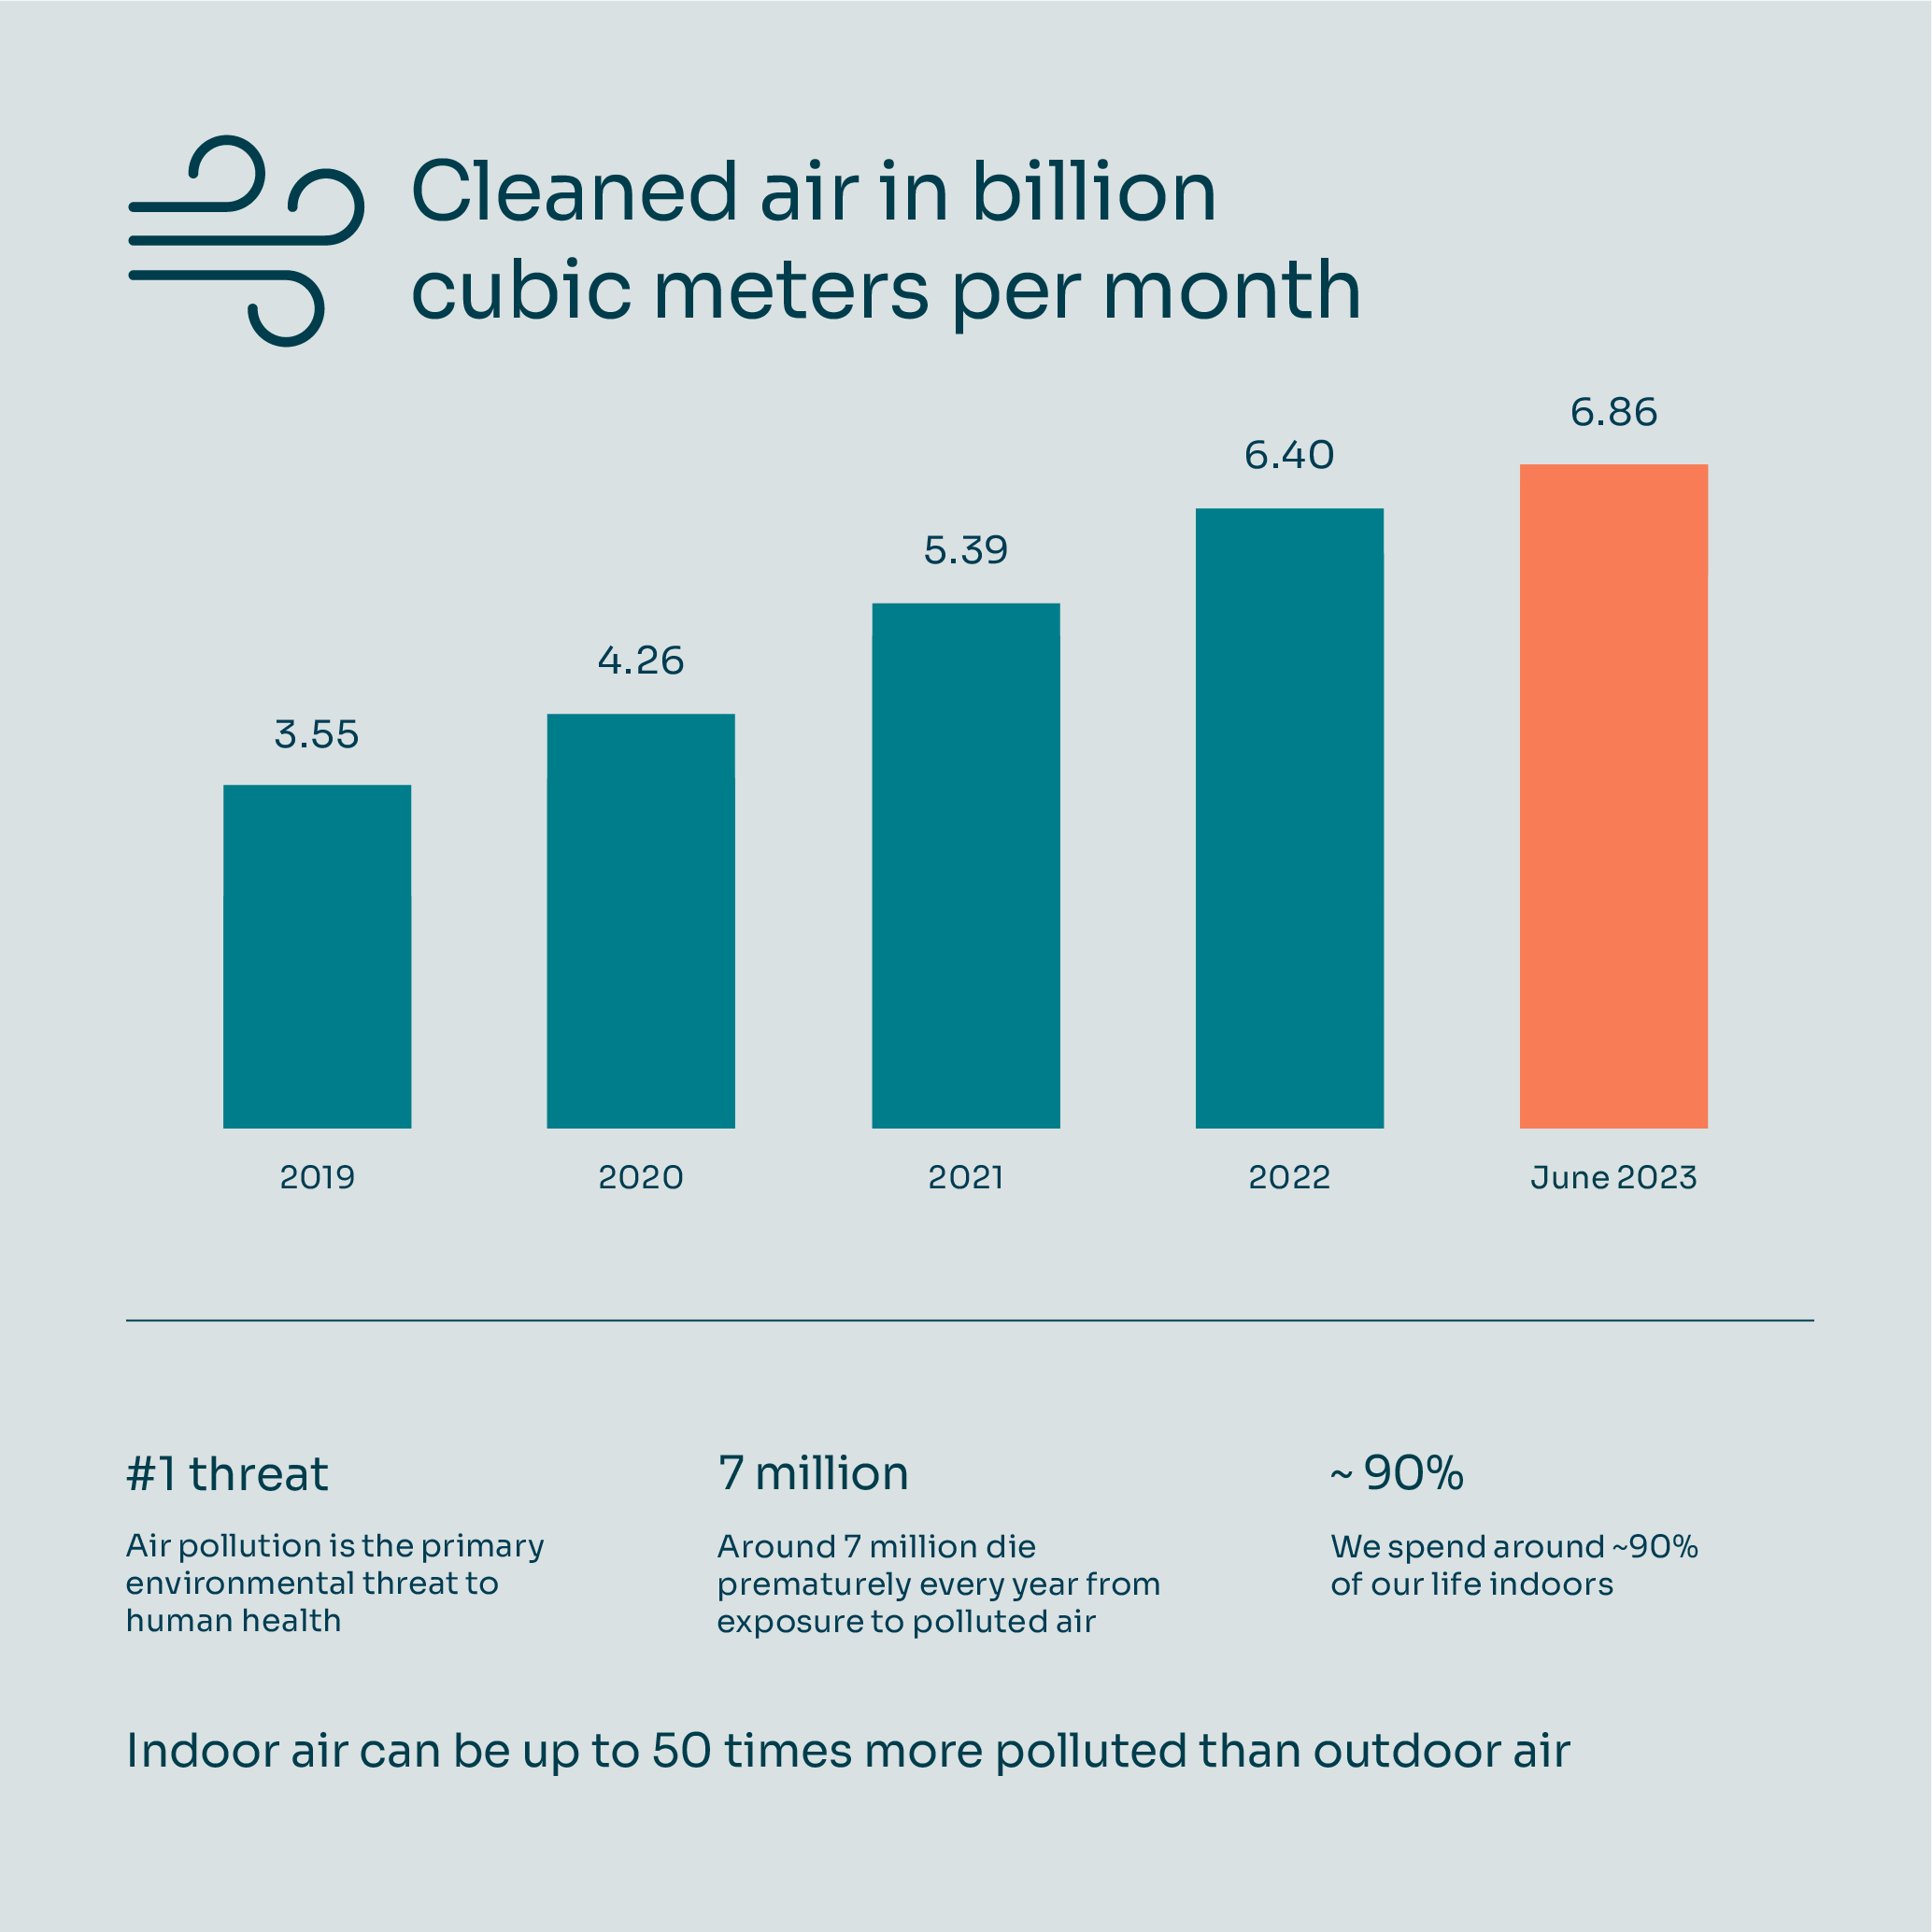 Clean air delivered in latest quarter